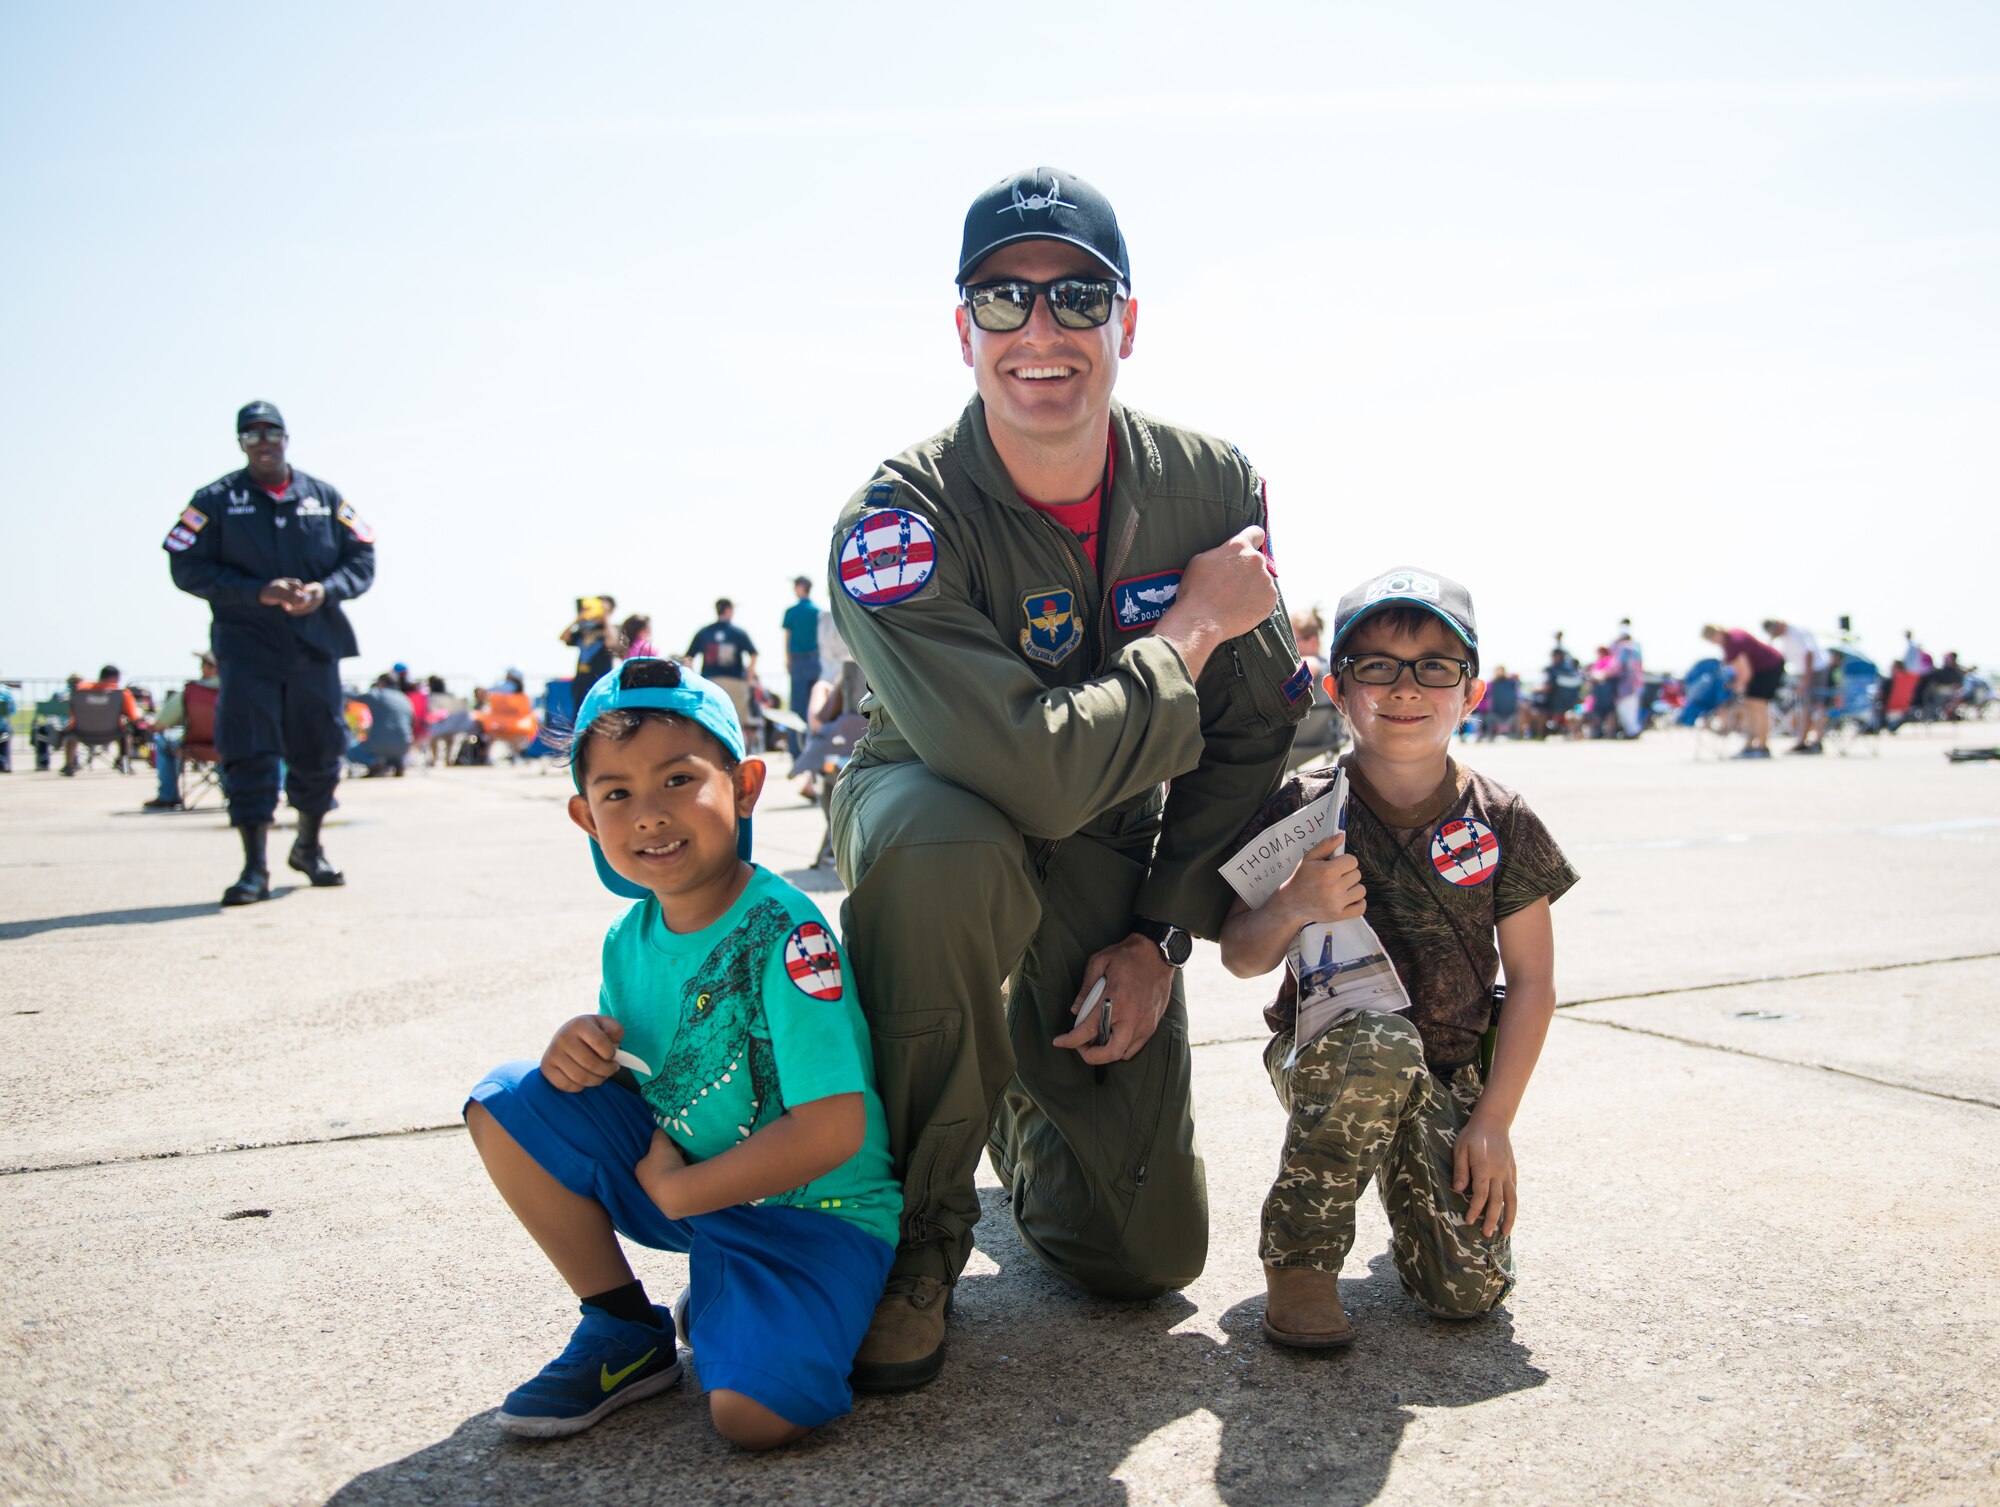 Capt. Andrew “Dojo” Olson, F-35 Heritage Flight Team pilot, poses for a photo with air show guests during the Wings Over South Texas air show at Naval Air Station, Texas, March 25, 2018. During the two-day event, approximately 100,000 guests from all across the United States attended the WOST air show. (U.S. Air Force photo by Airman 1st Class Alexander Cook)